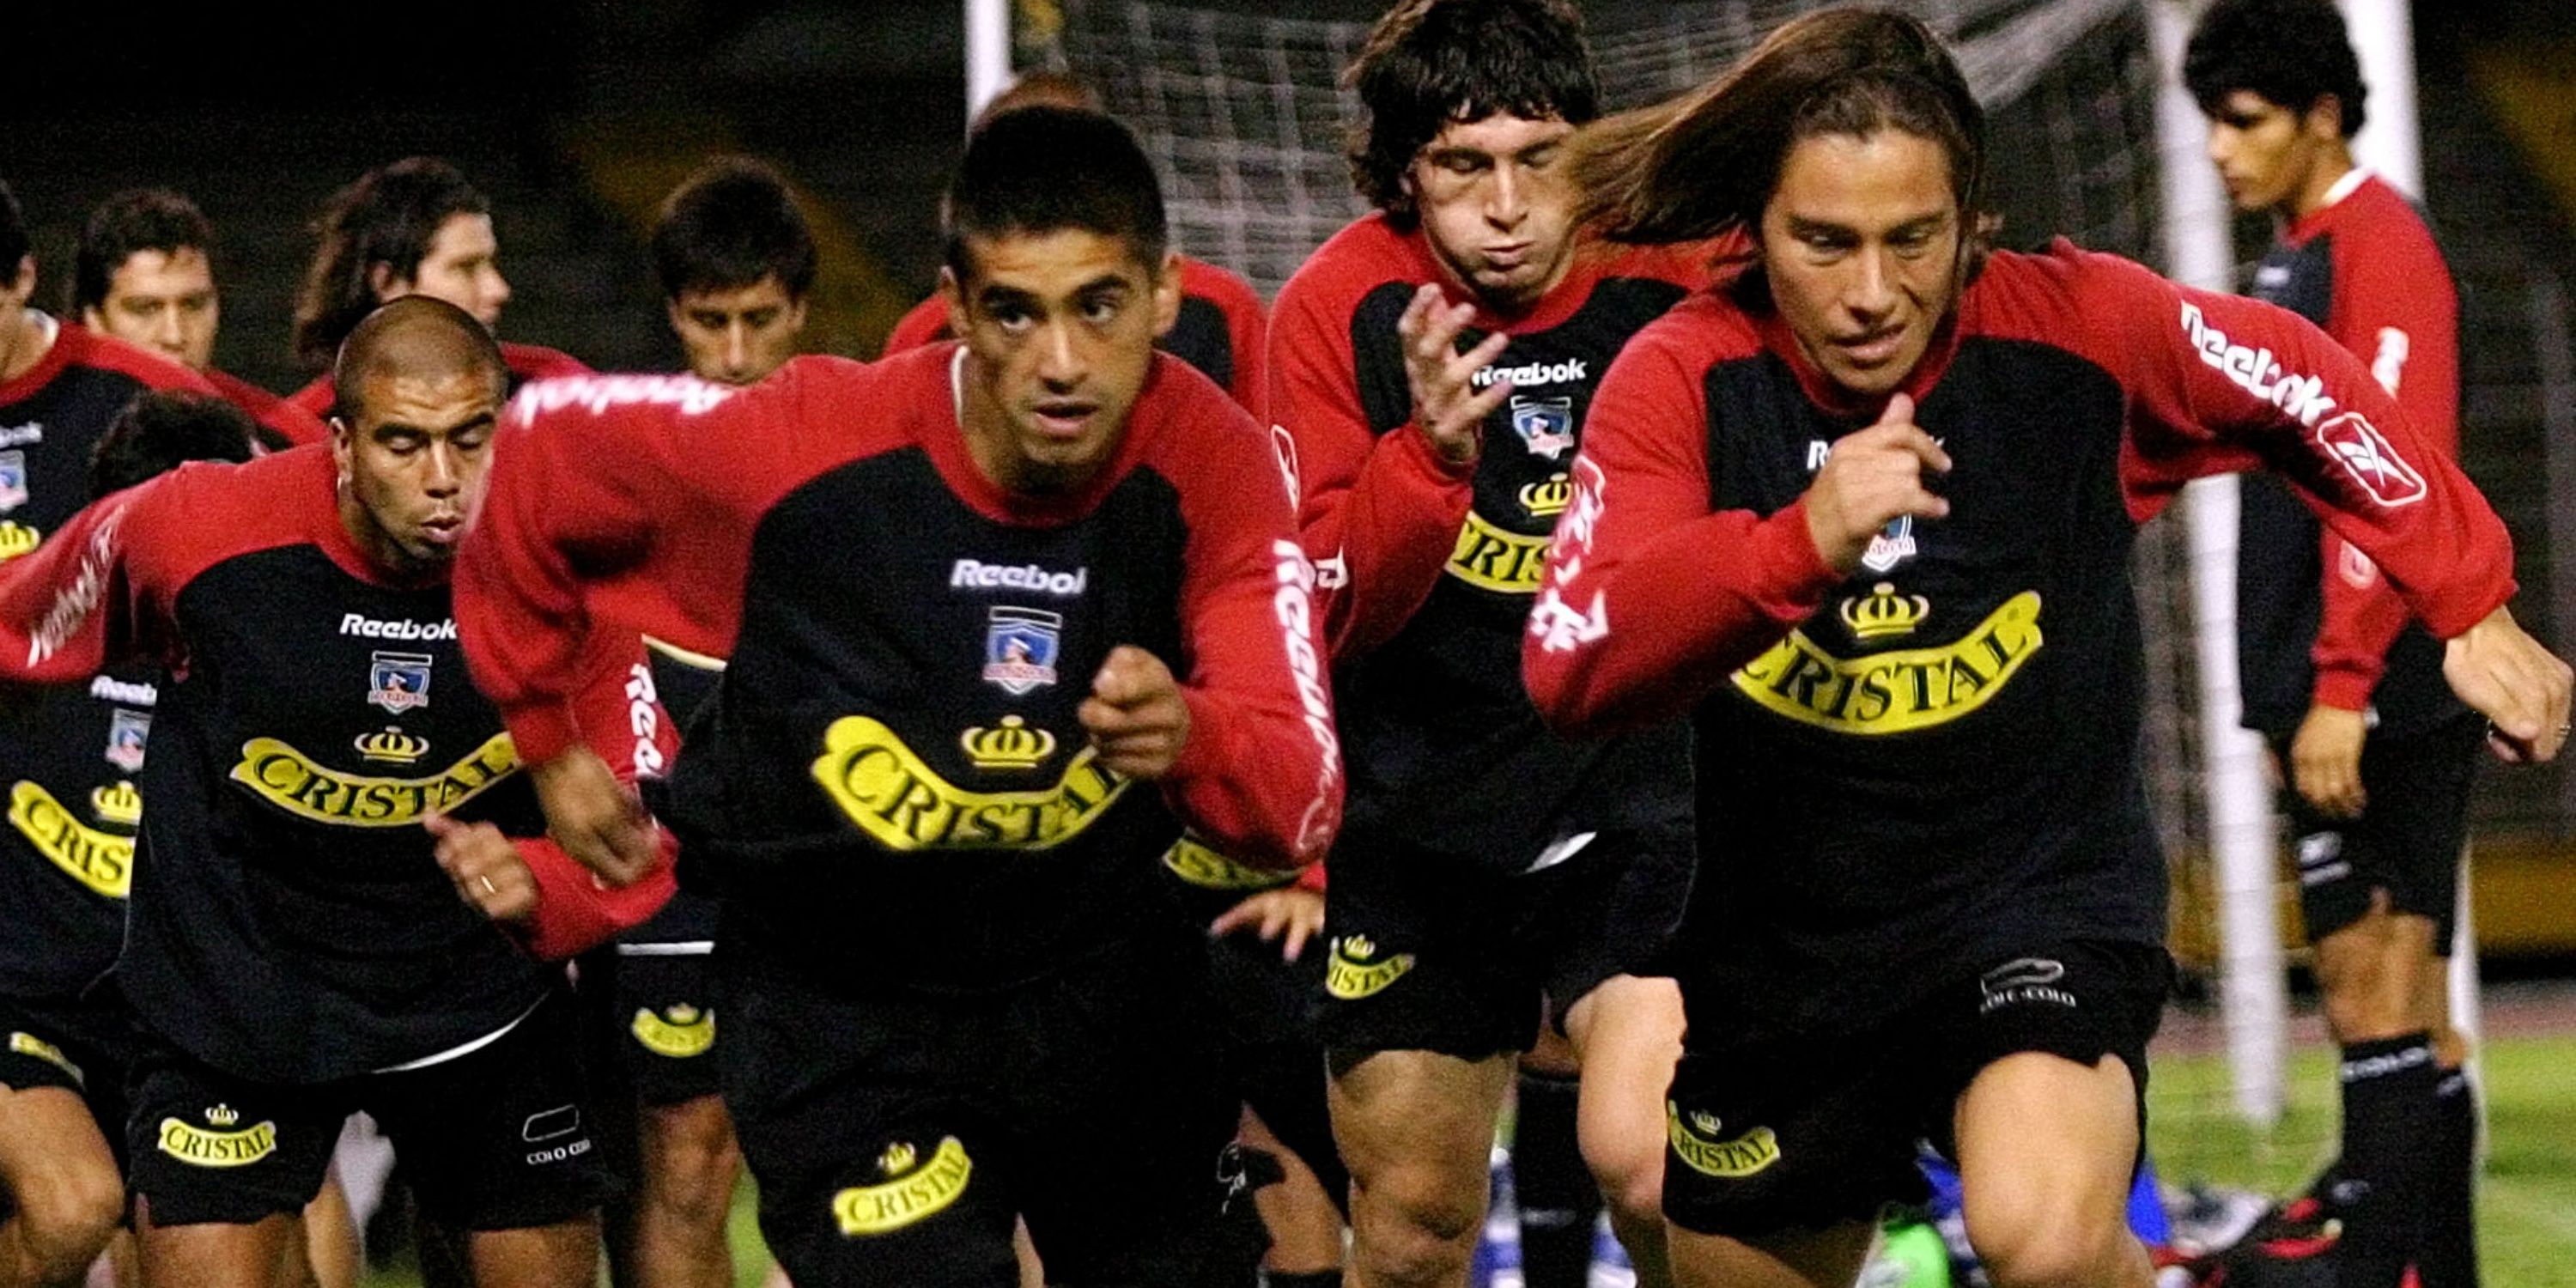 Colo Colo players run during a practice session.